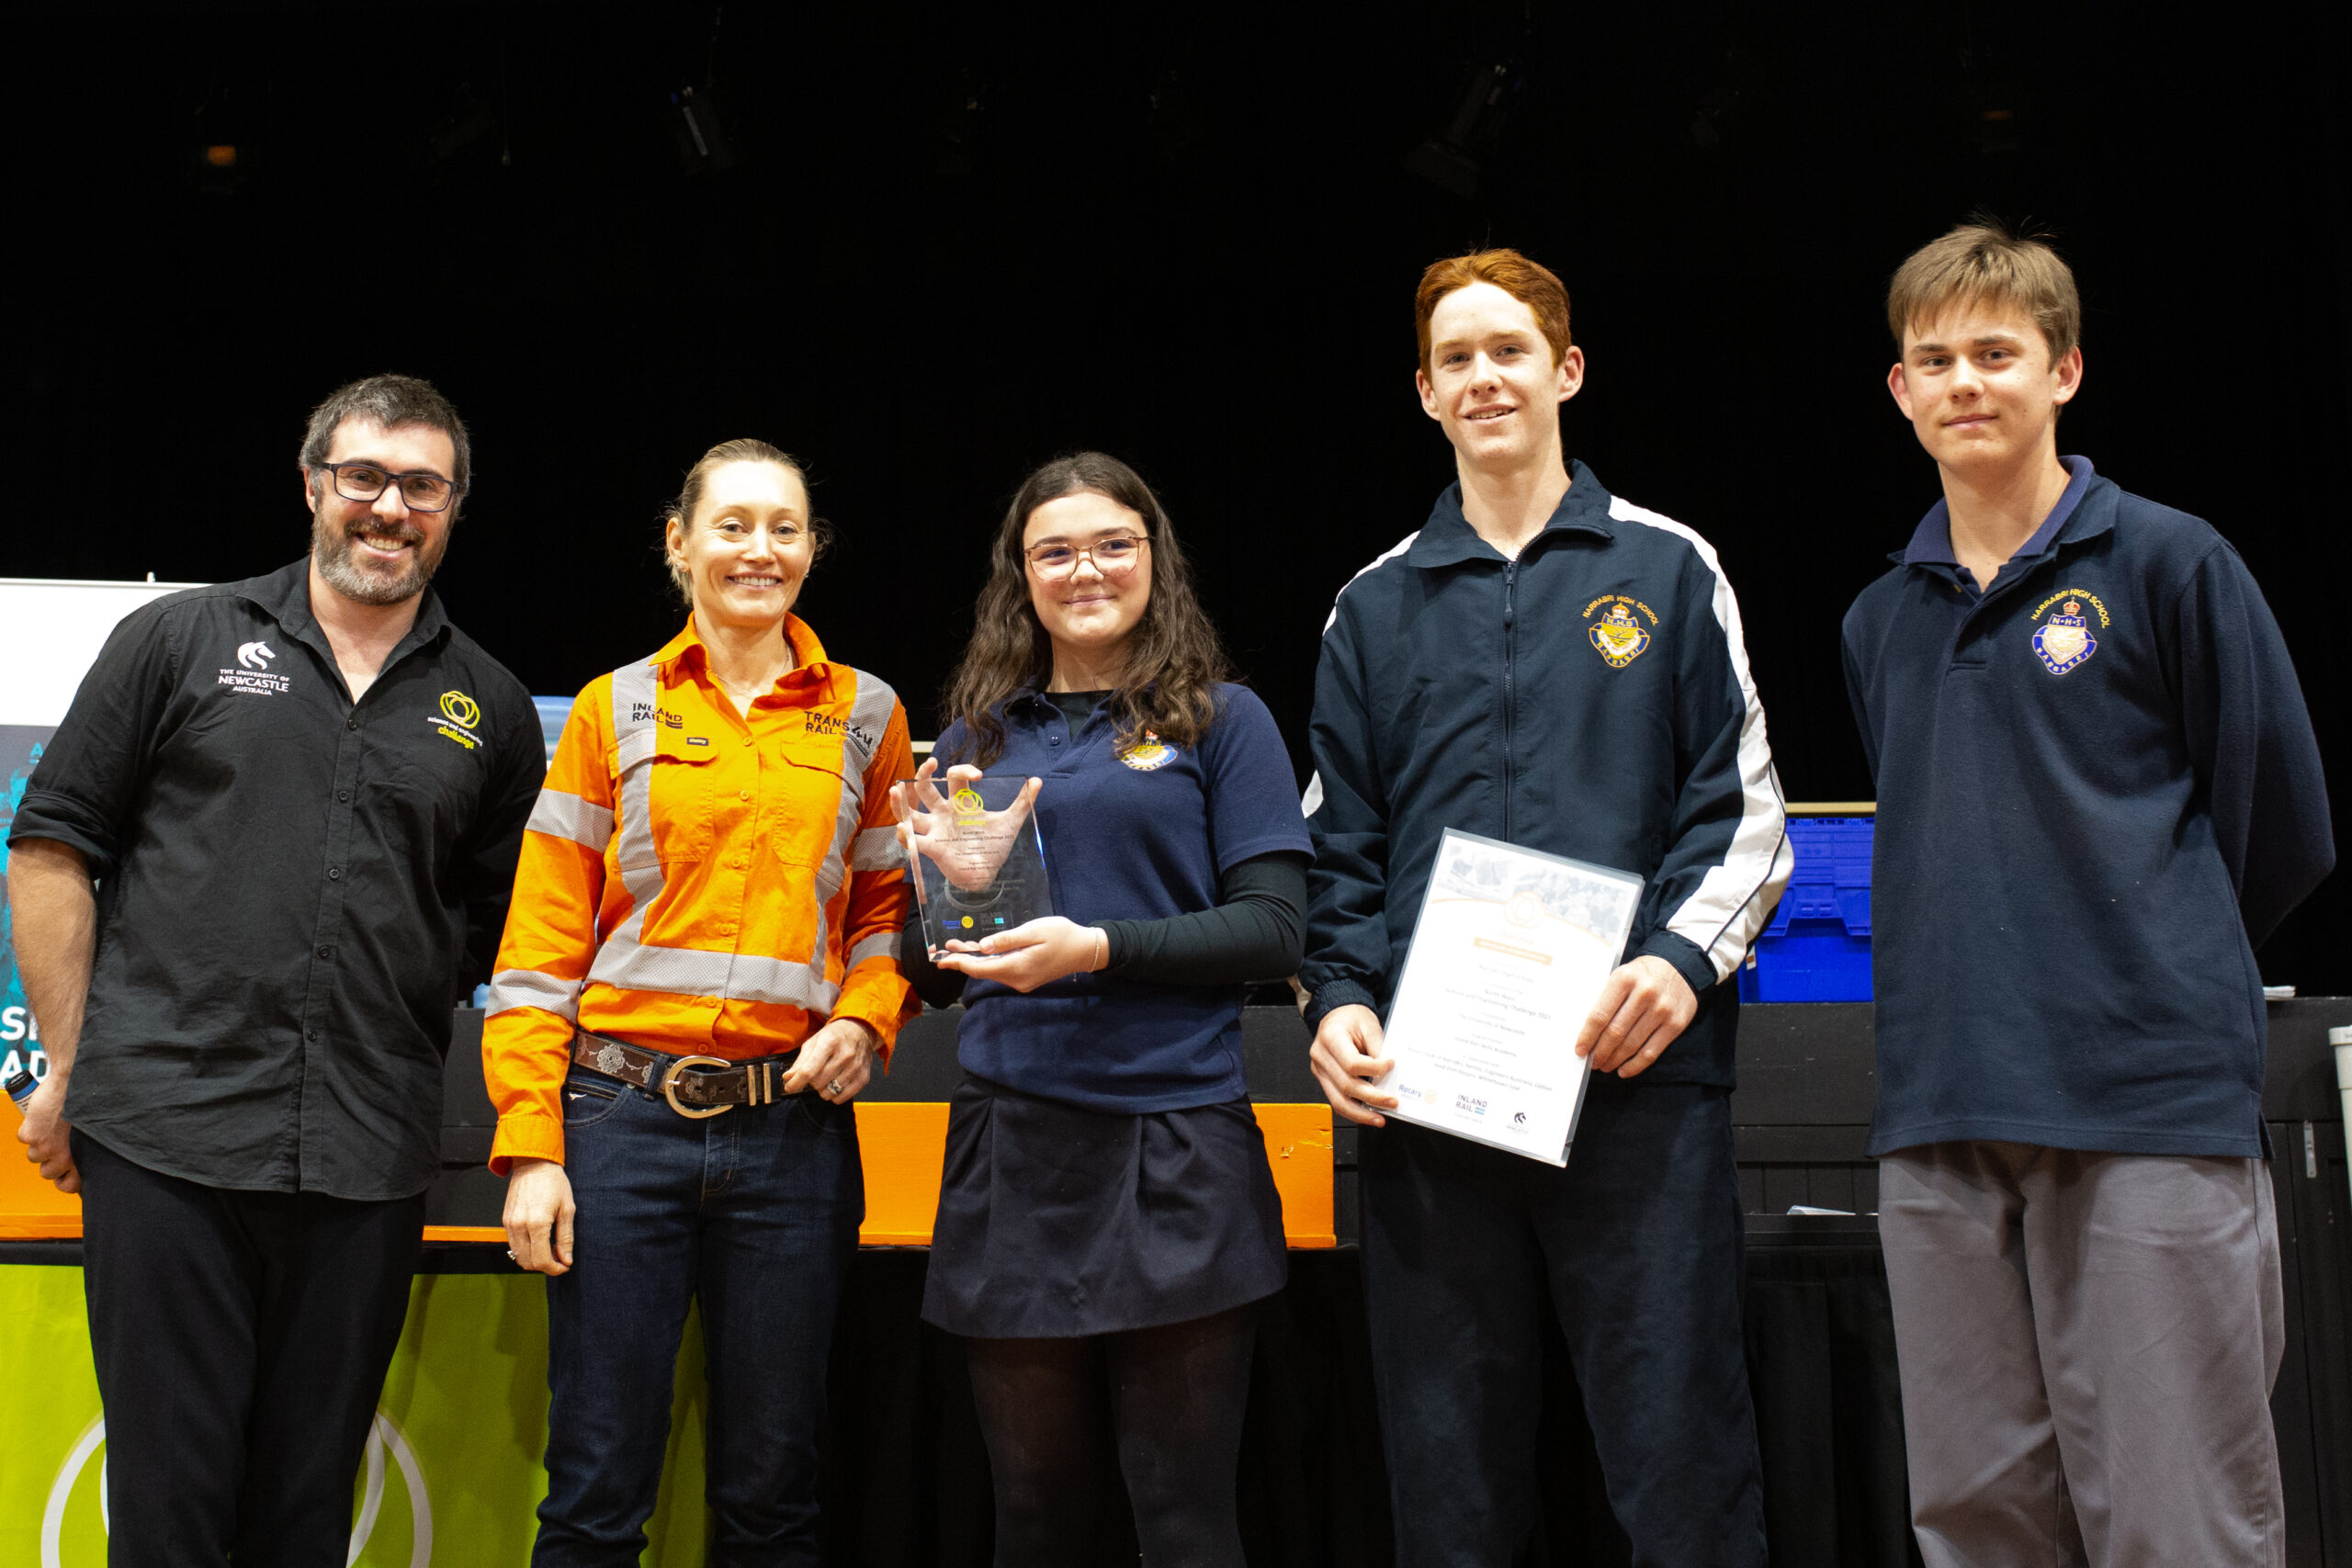 Science and Engineering trophy for local students | PHOTOS